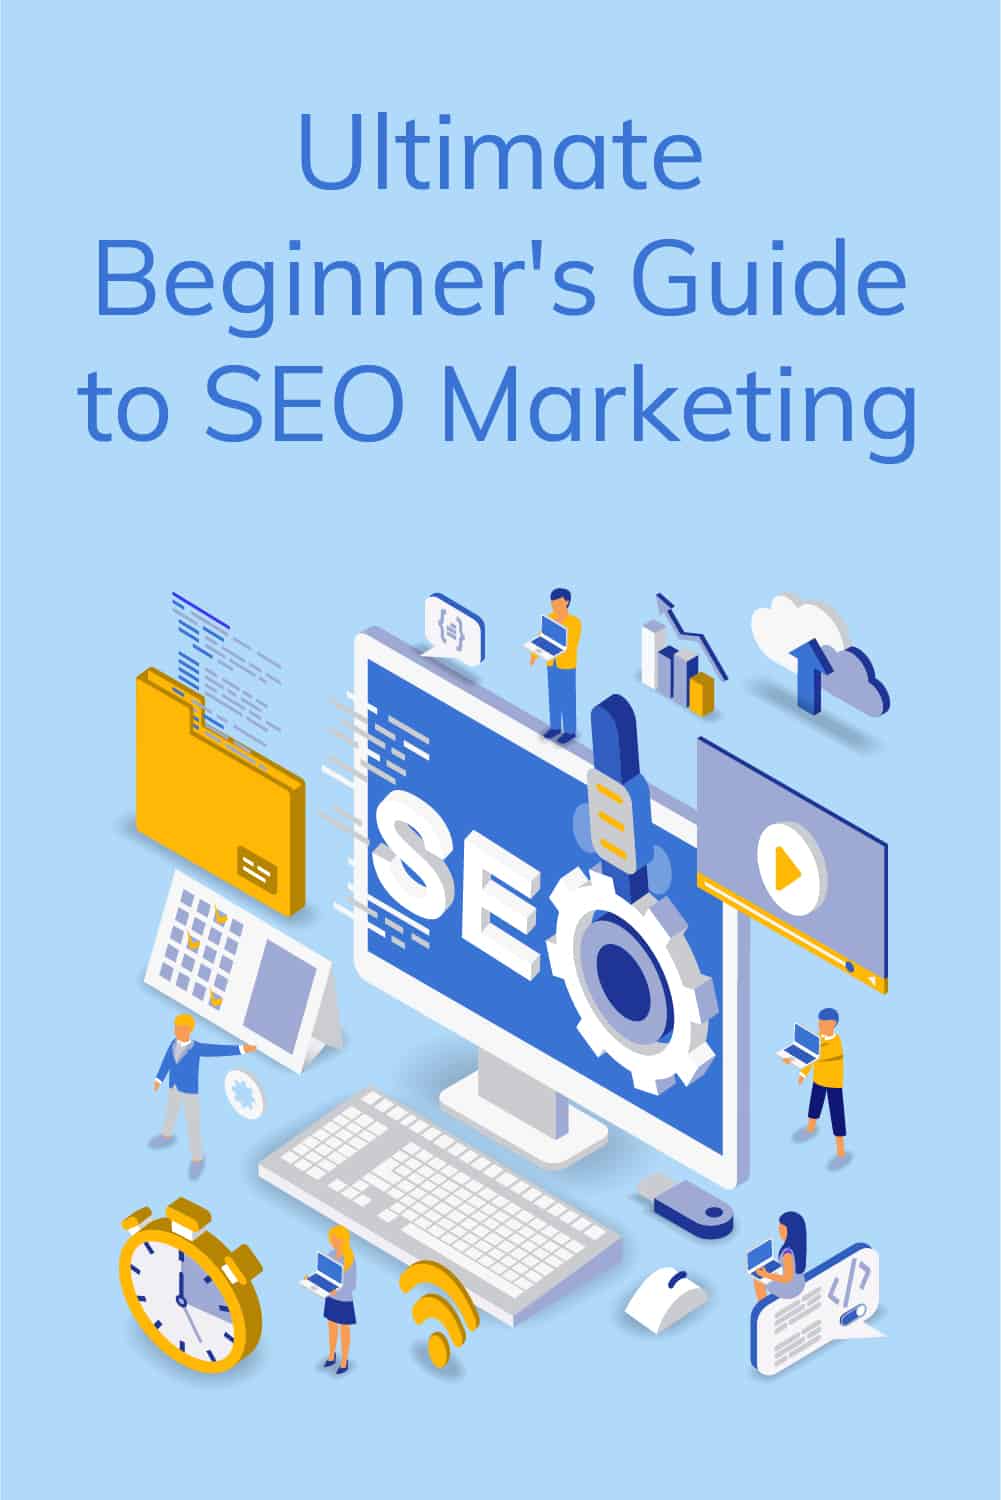 Wondering what SEO marketing is and how it affects the search engine visibility of your website and revenue? We’ve made this easy-to-digest SEO guide for newbies, just like you. Enjoy it! via @scopedesign